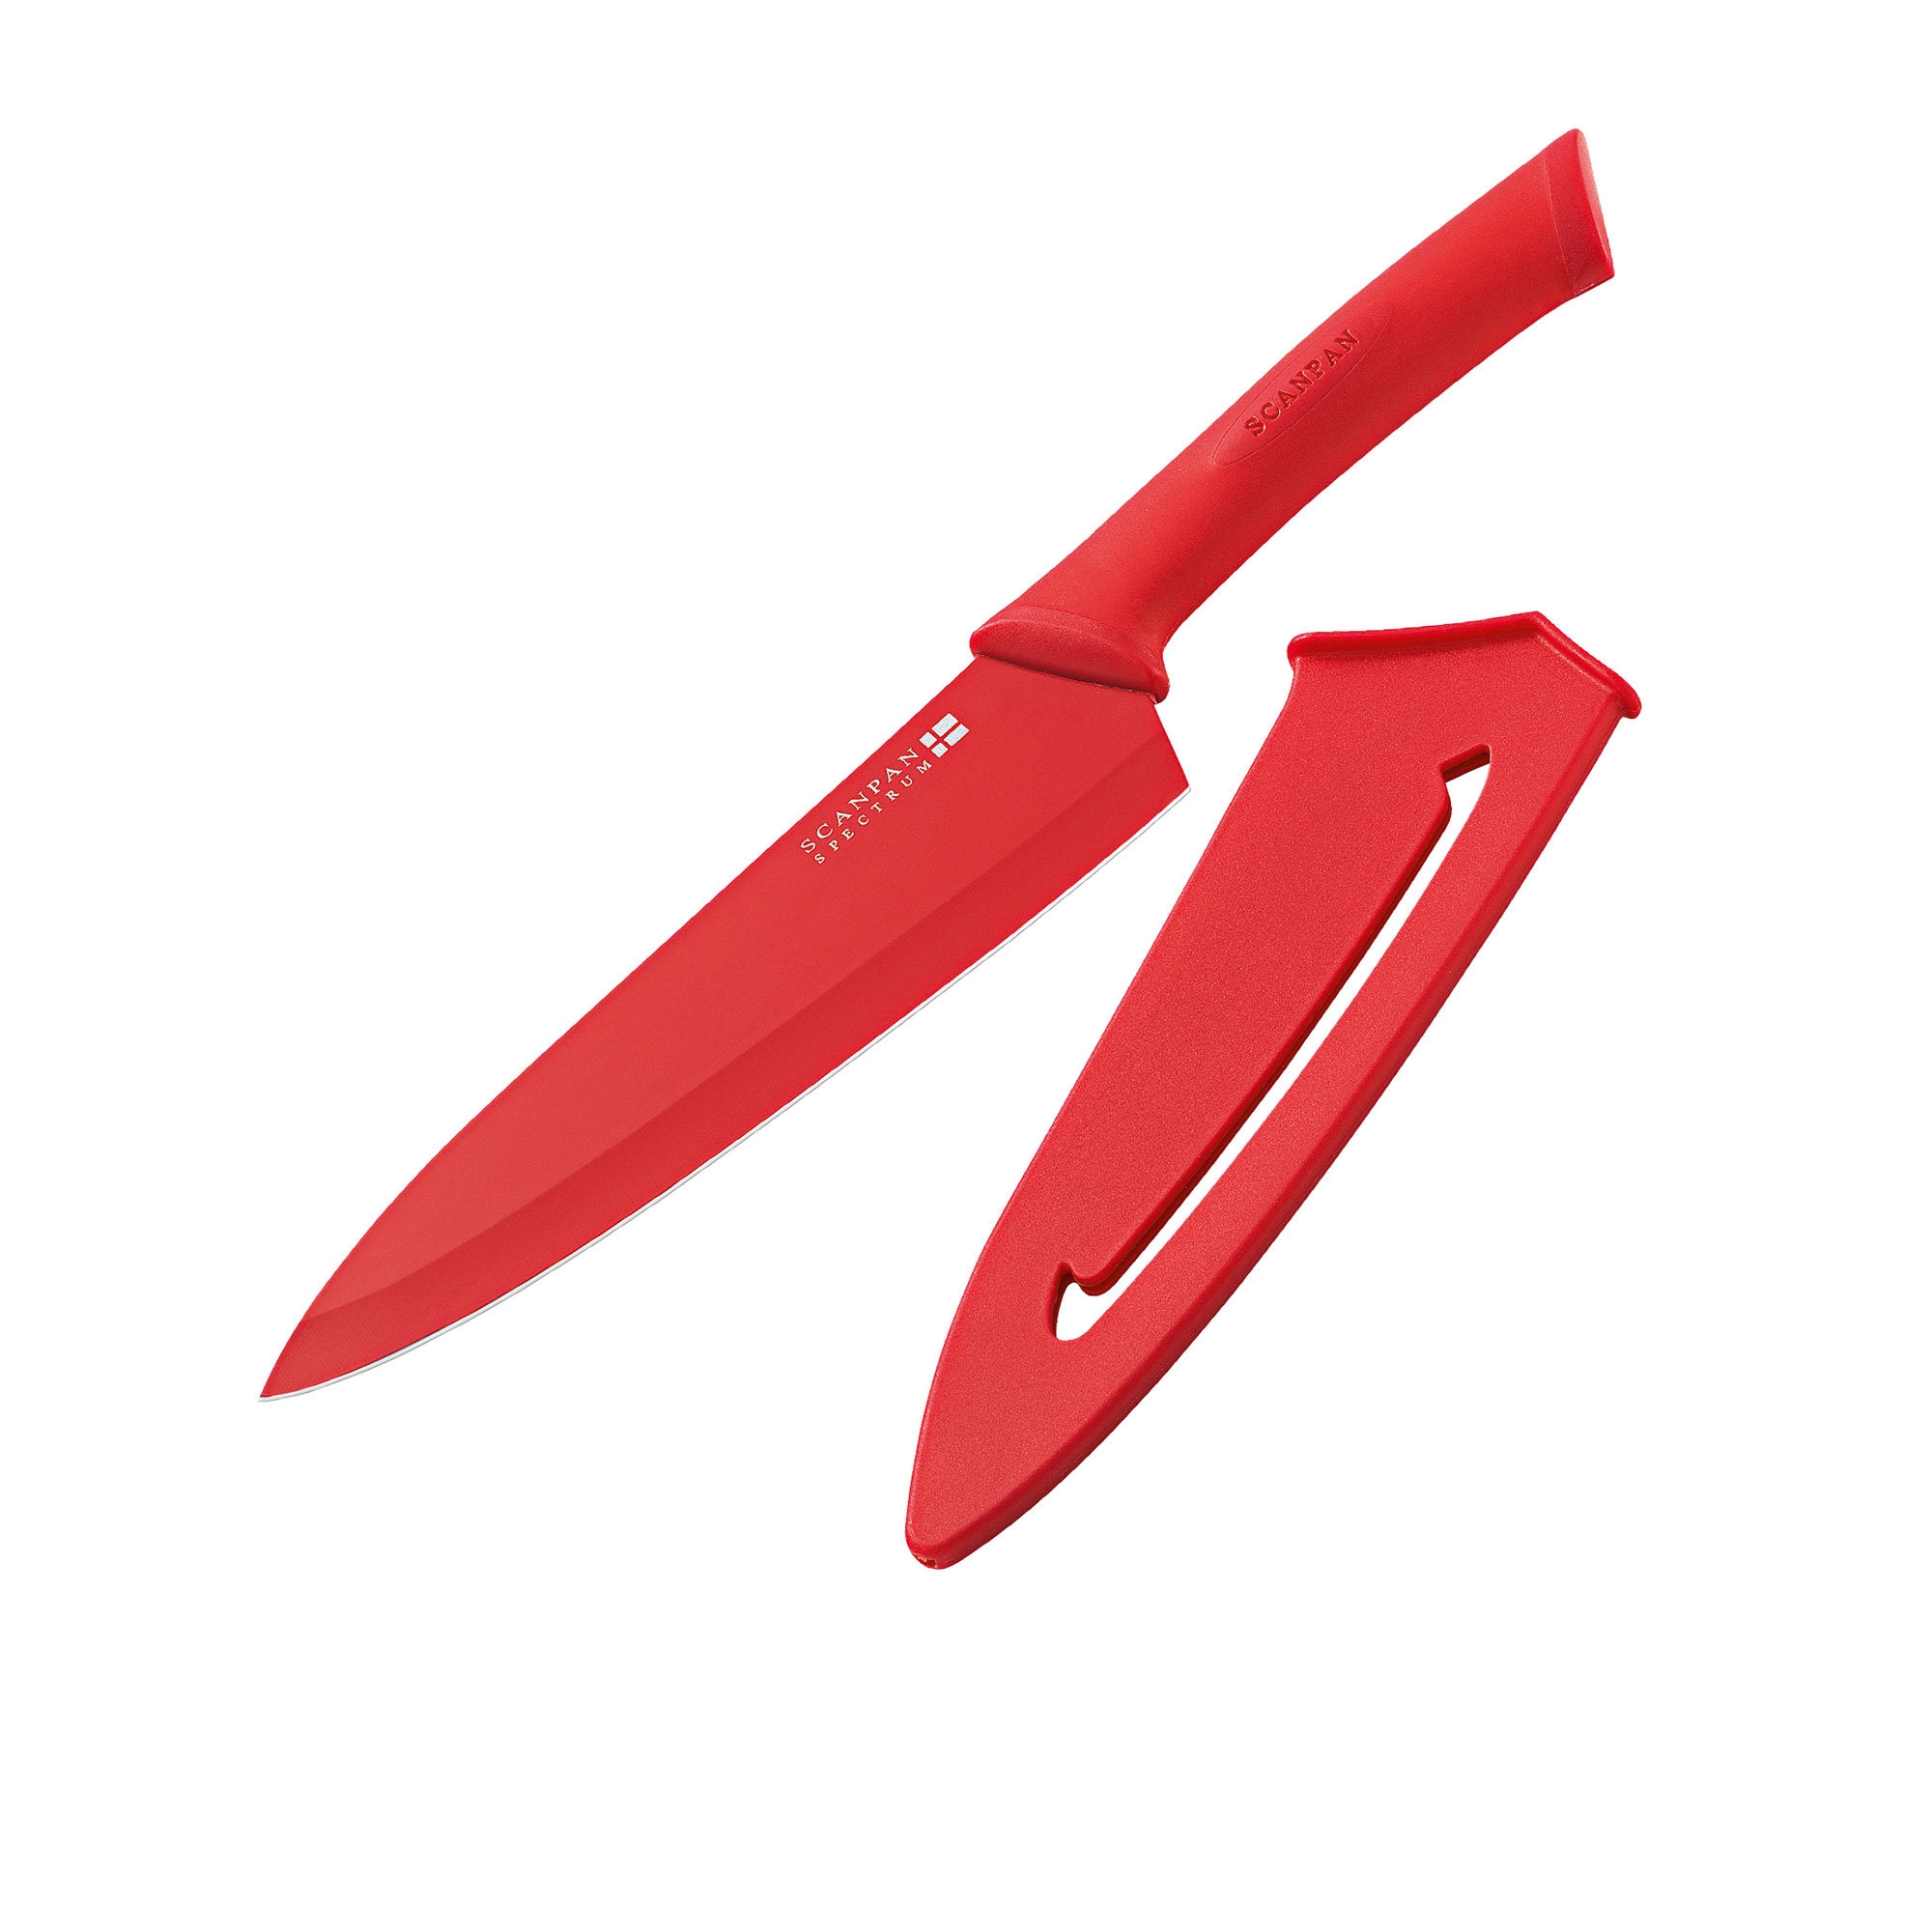 Scanpan Spectrum Soft Touch Cooks Knife 18cm Red Image 1